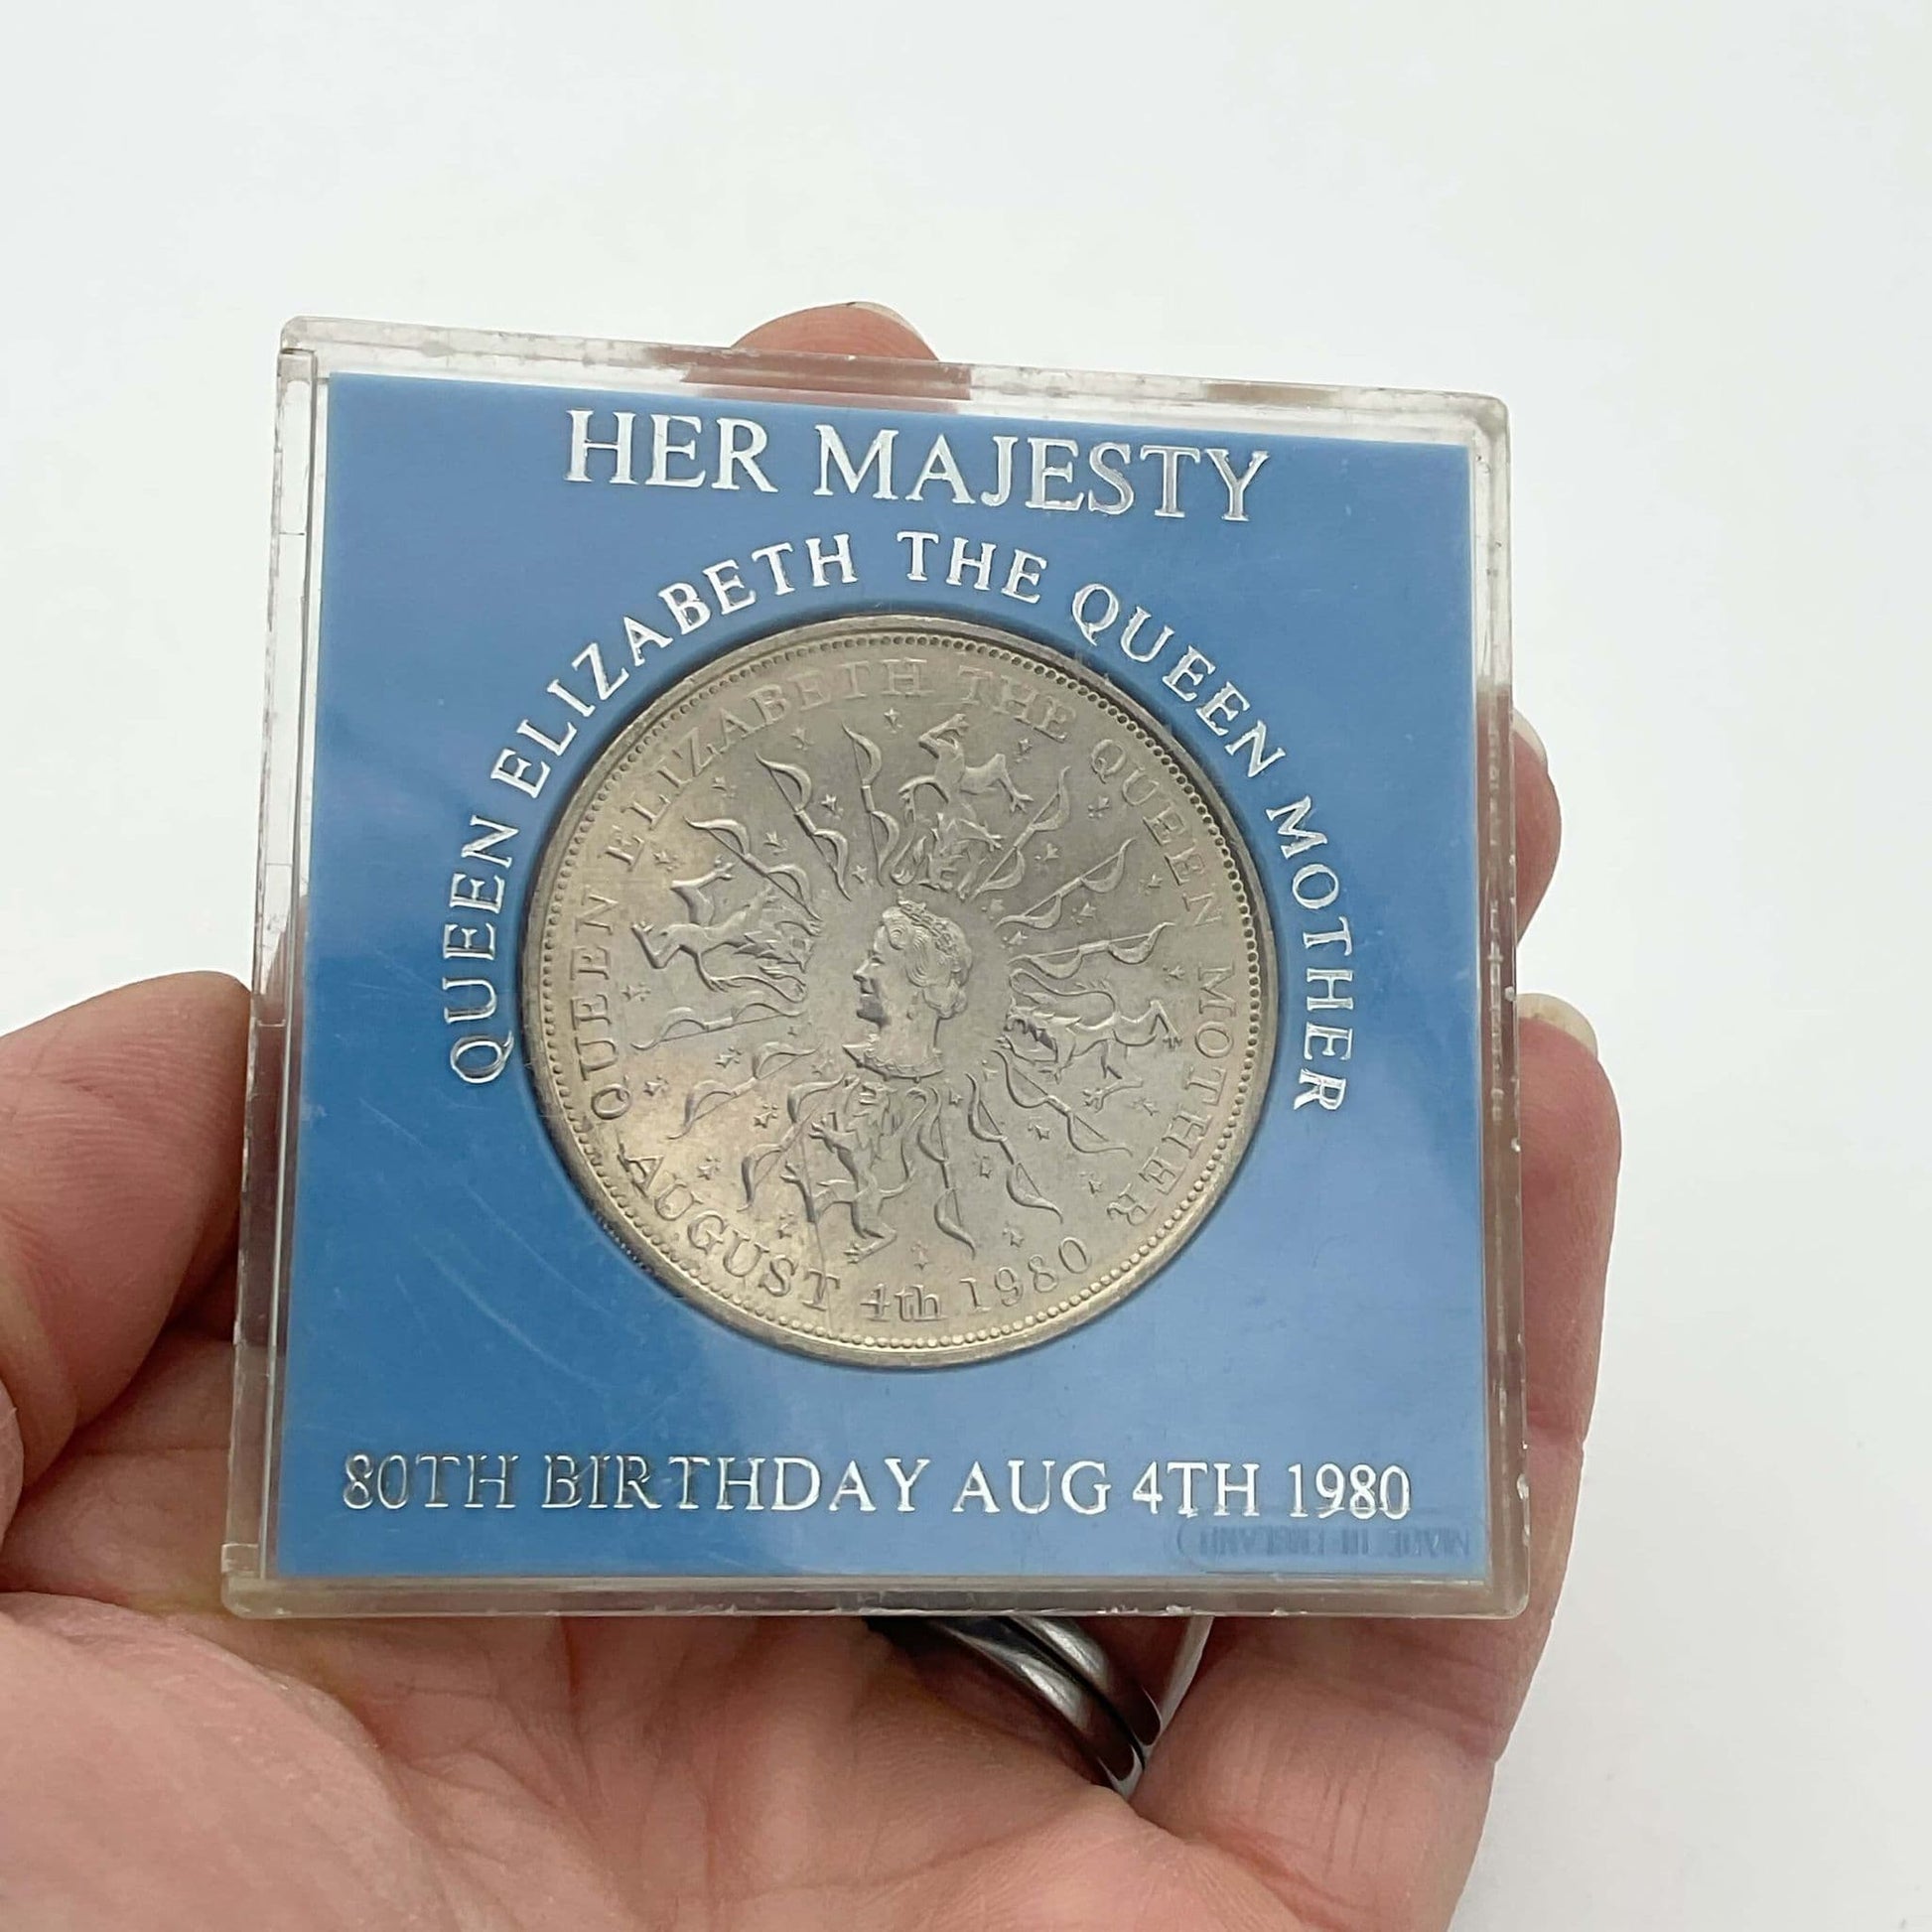 Silver coin featuring the Queen Mother's head in a light blue case held in a hand